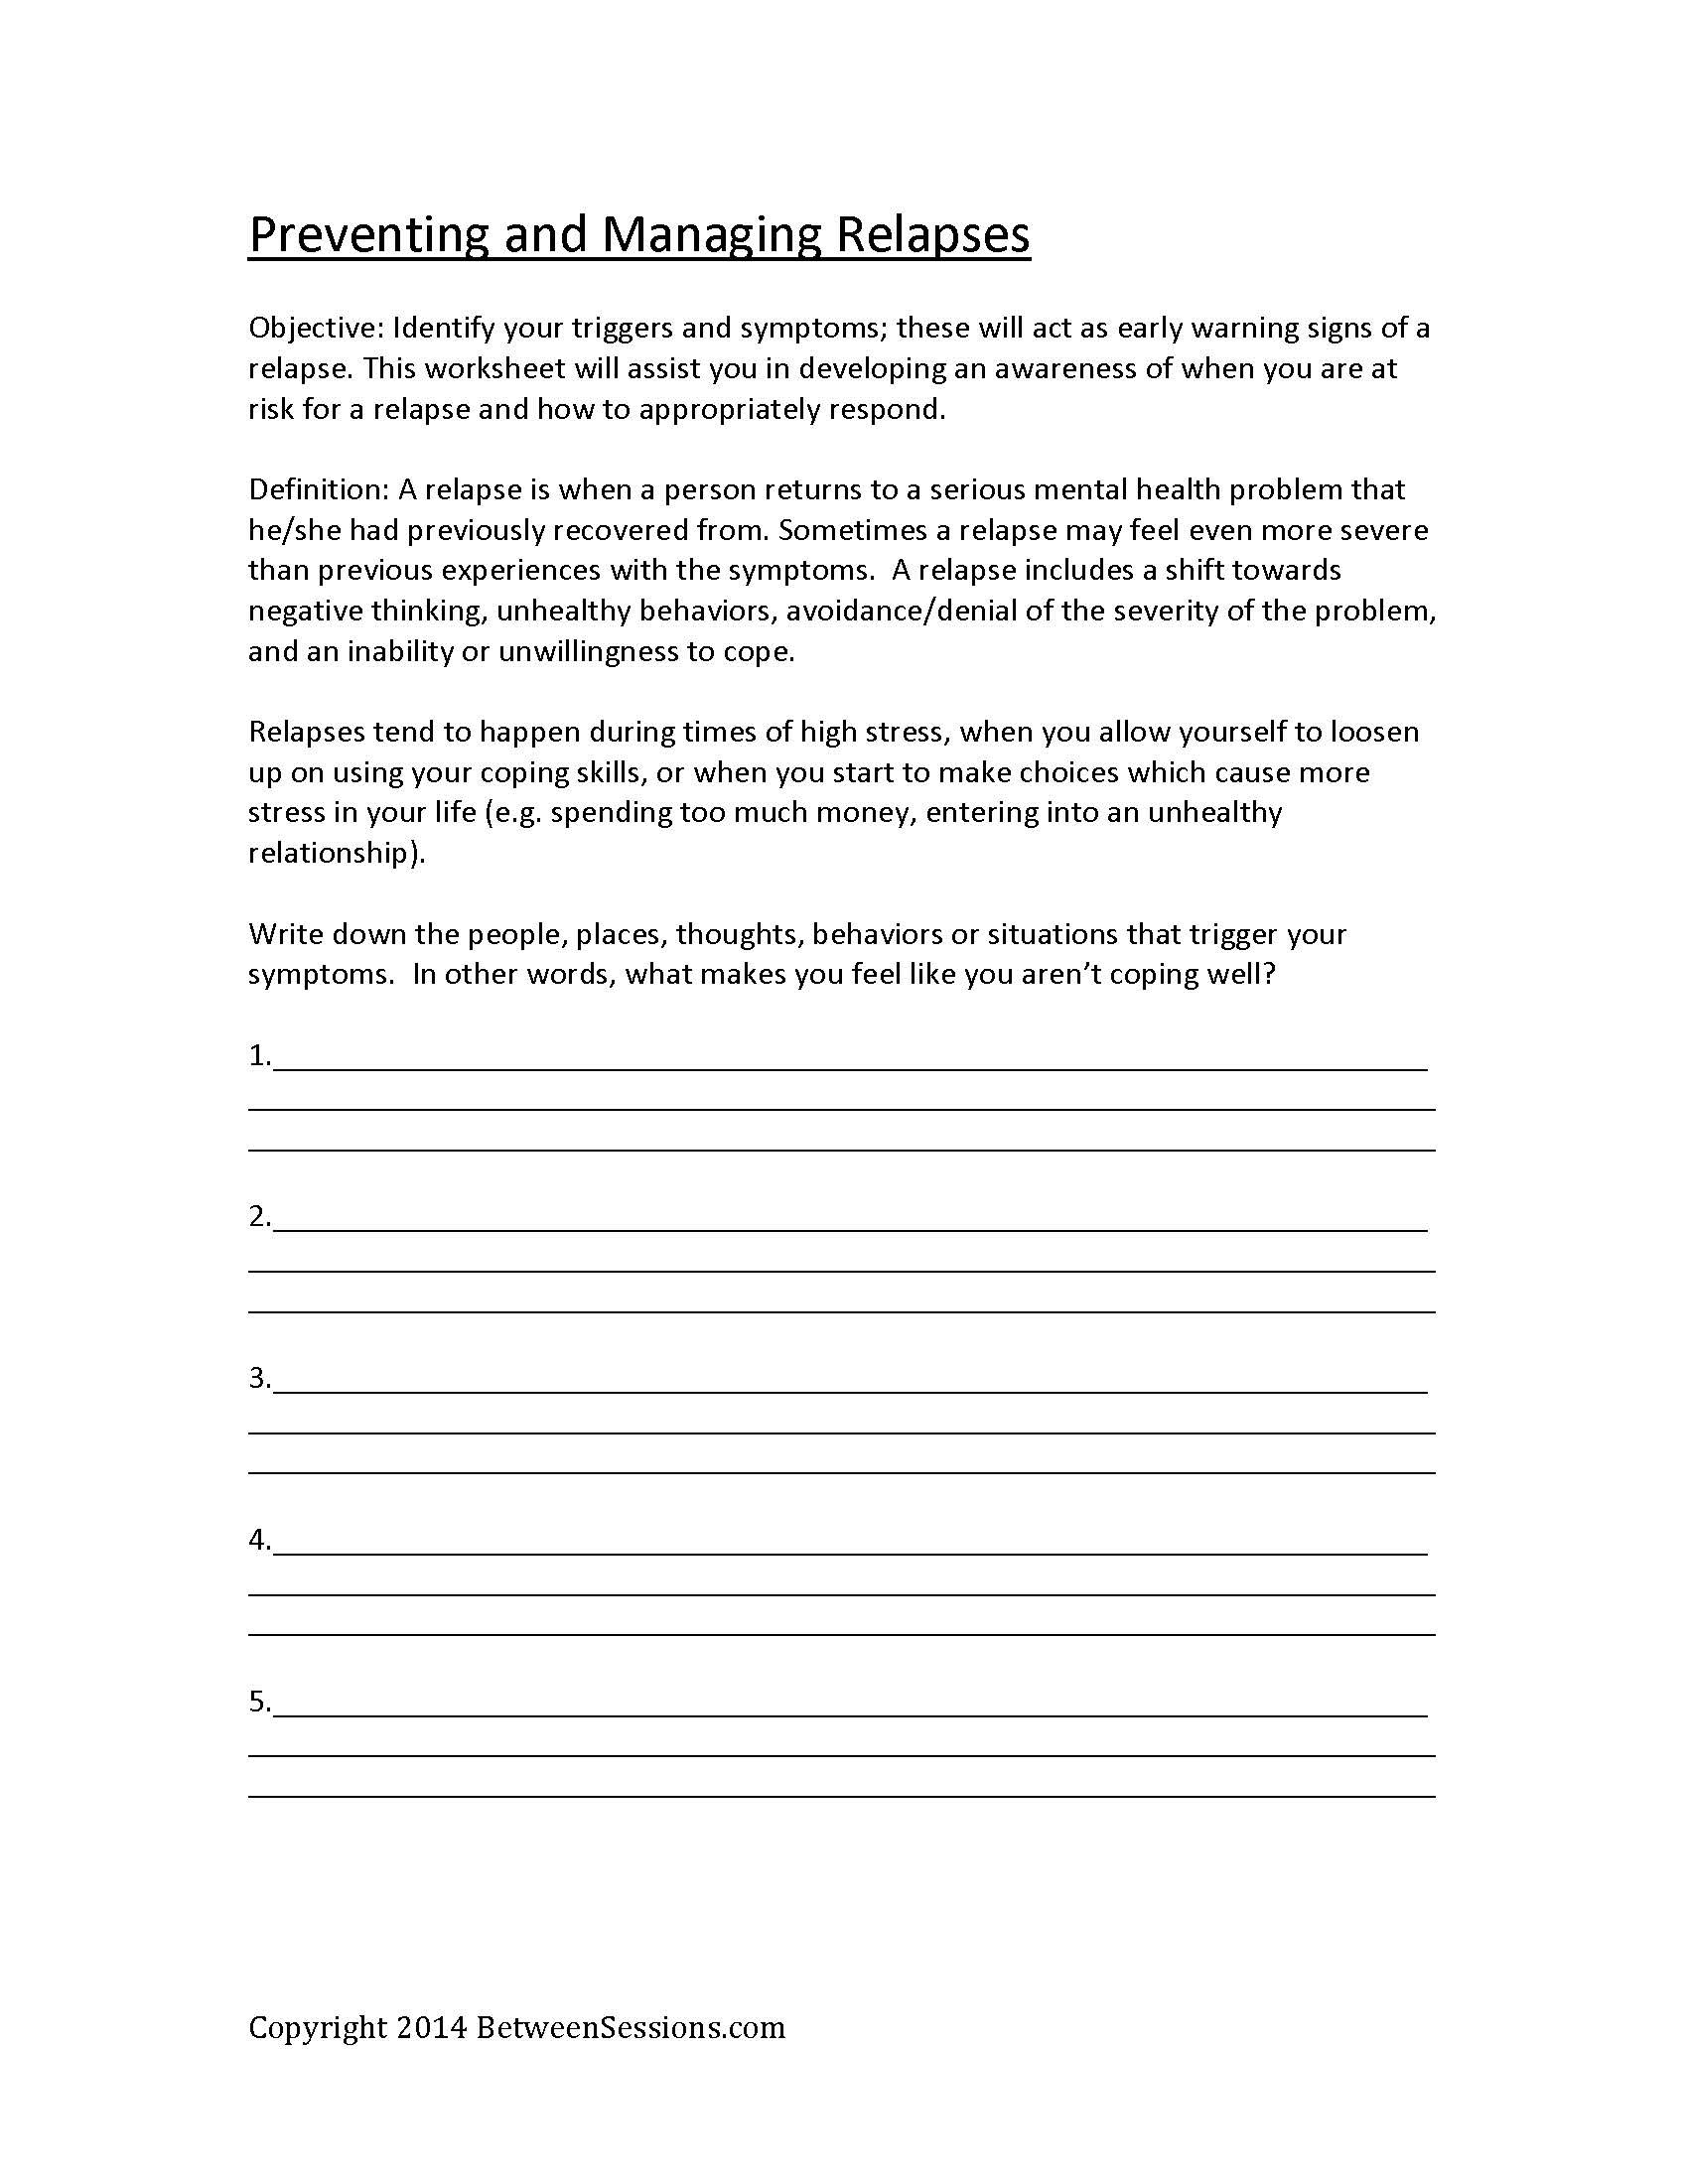 Between Sessions Mental Health Worksheets For Adults  Cognitive As Well As Self Esteem Therapy Worksheets